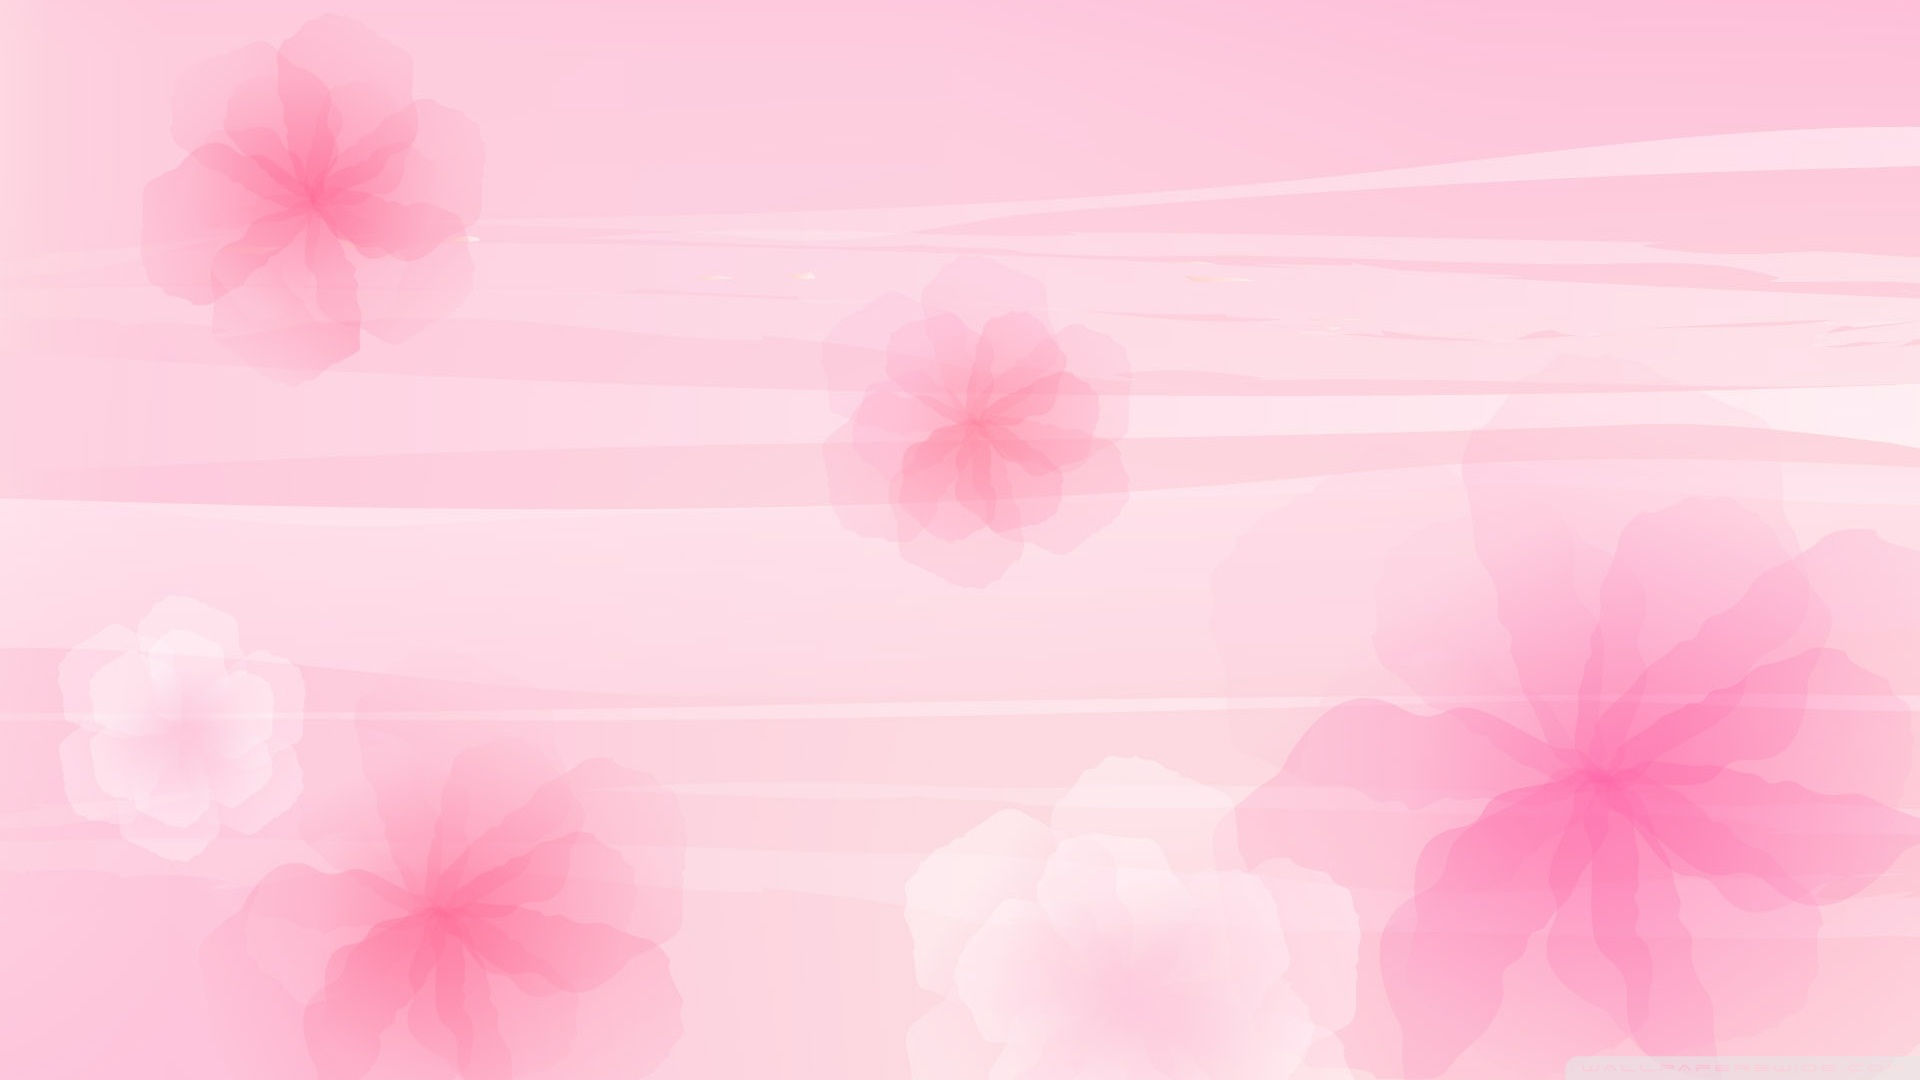 Pink Flowers Background 2 Wallpaper 1920x1080 Pink Flowers